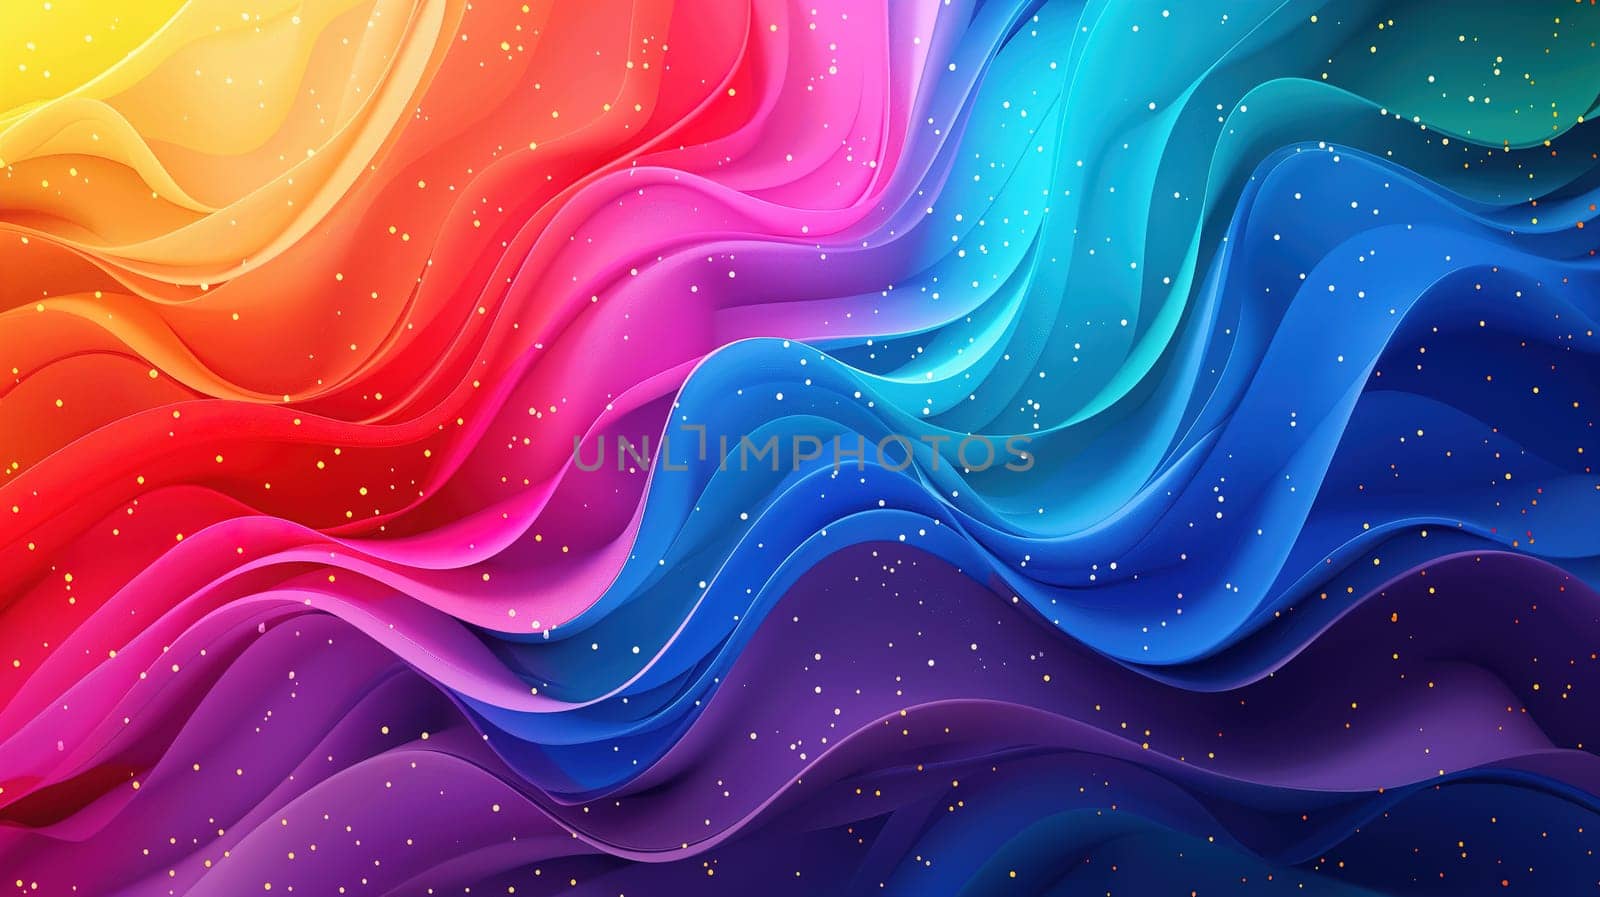 Vibrant Abstract Background With Stars and Waves by TRMK